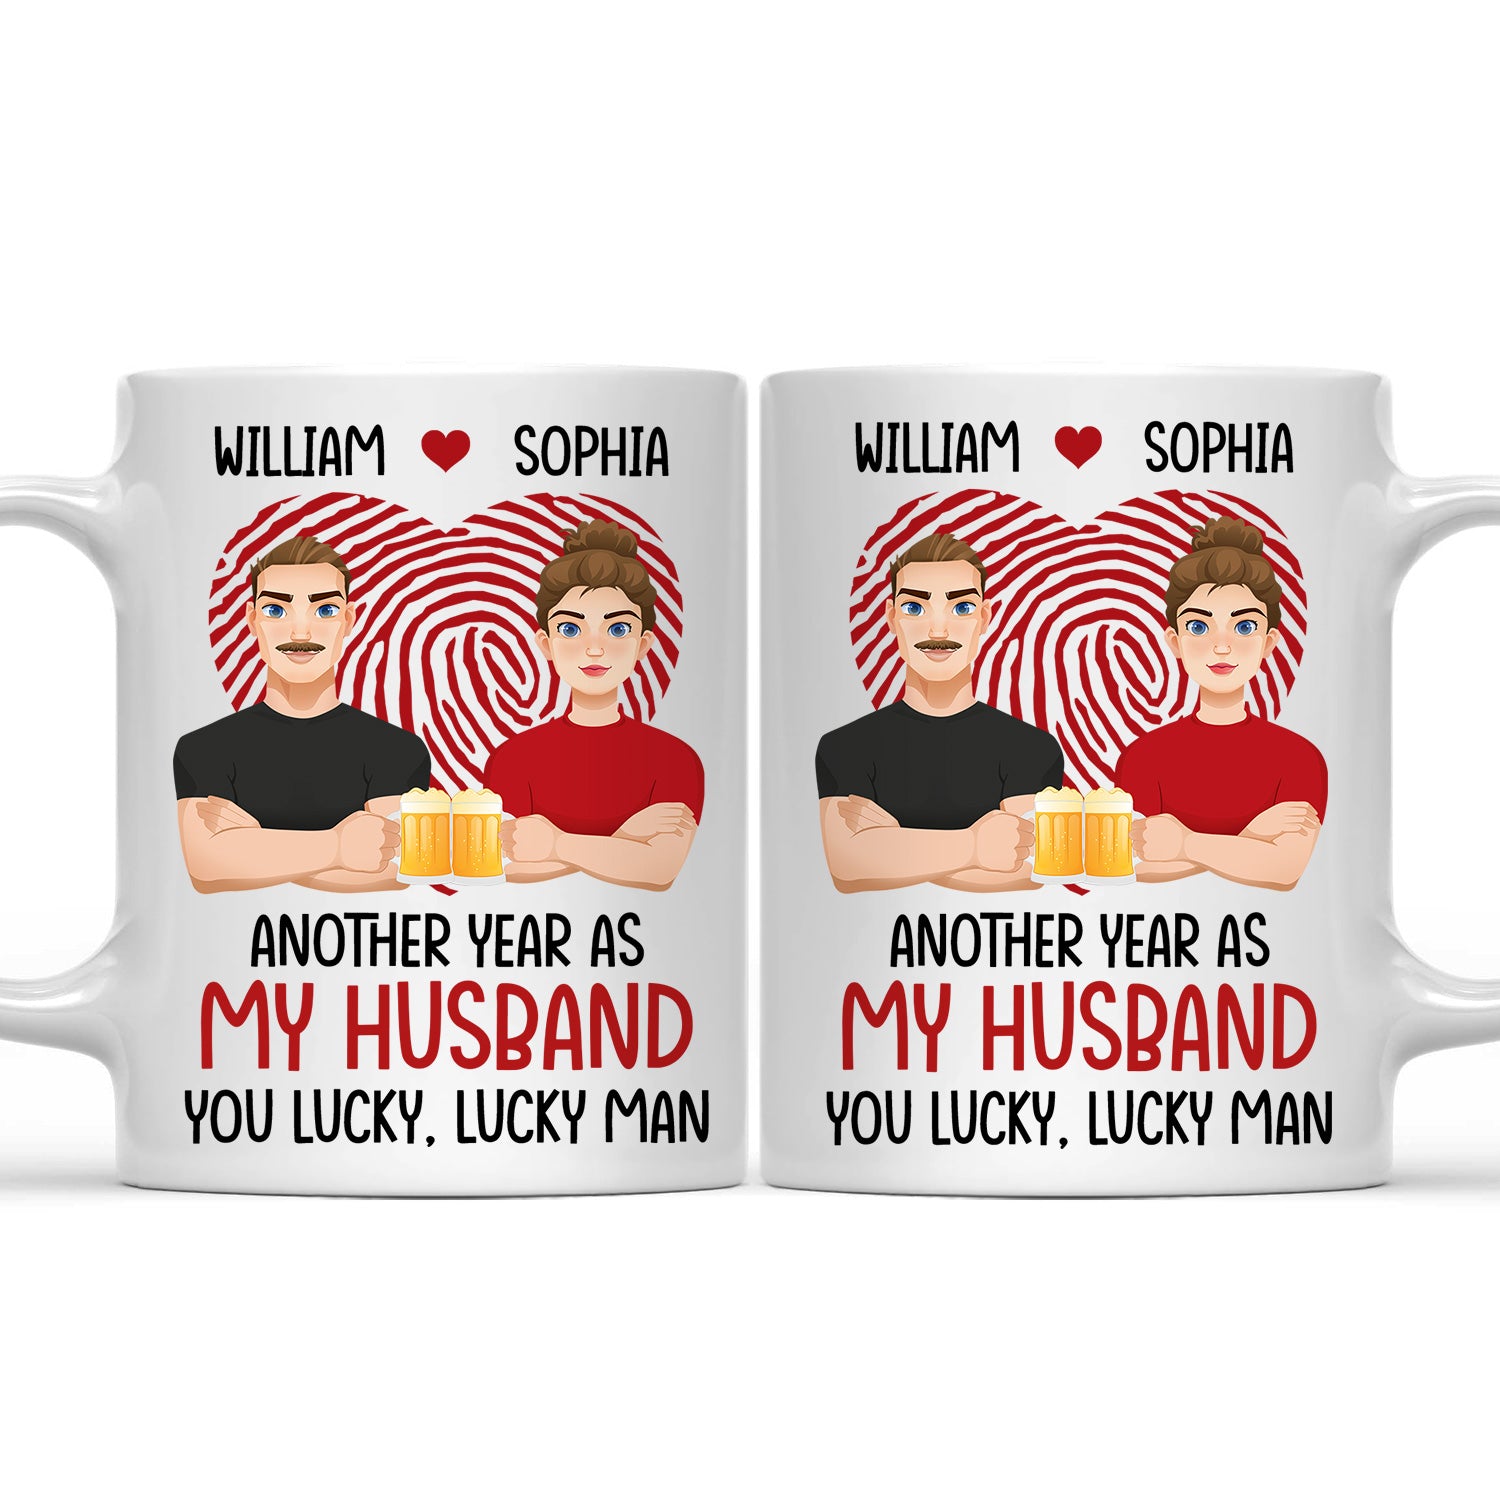 Another Year As My Husband - Anniversary, Loving Gift For Couples, Husband, Wife - Personalized Mug